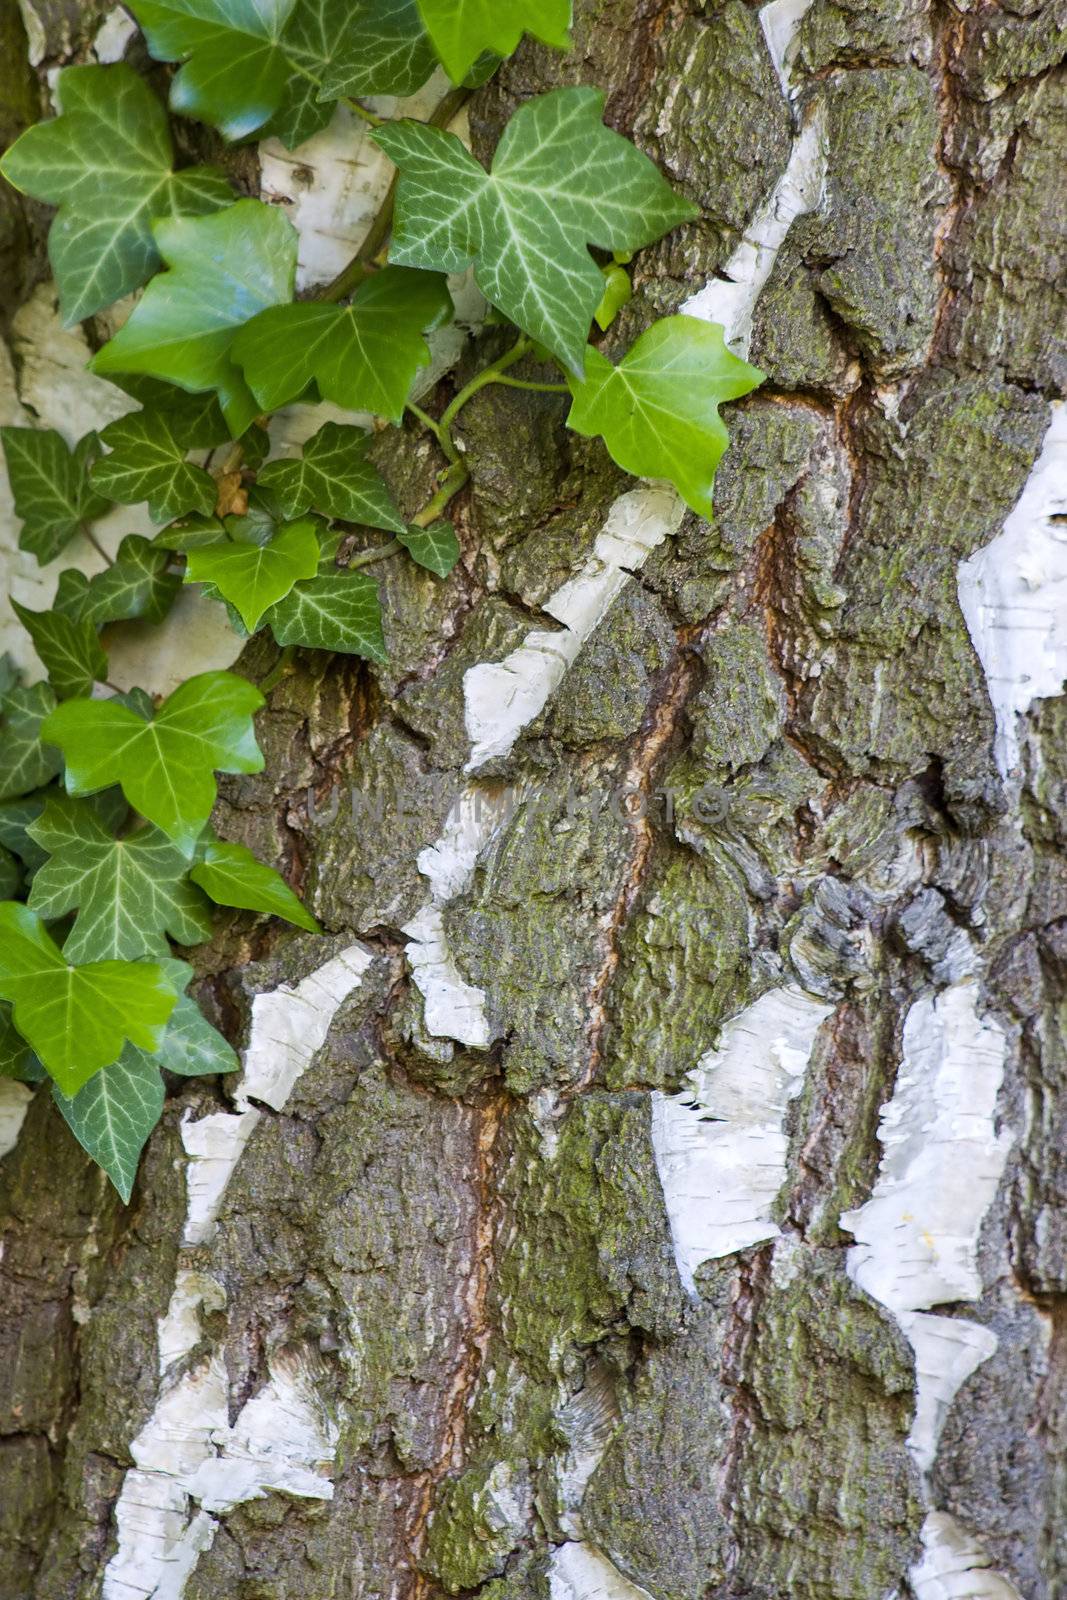 natural background with ivy leaves on bark 